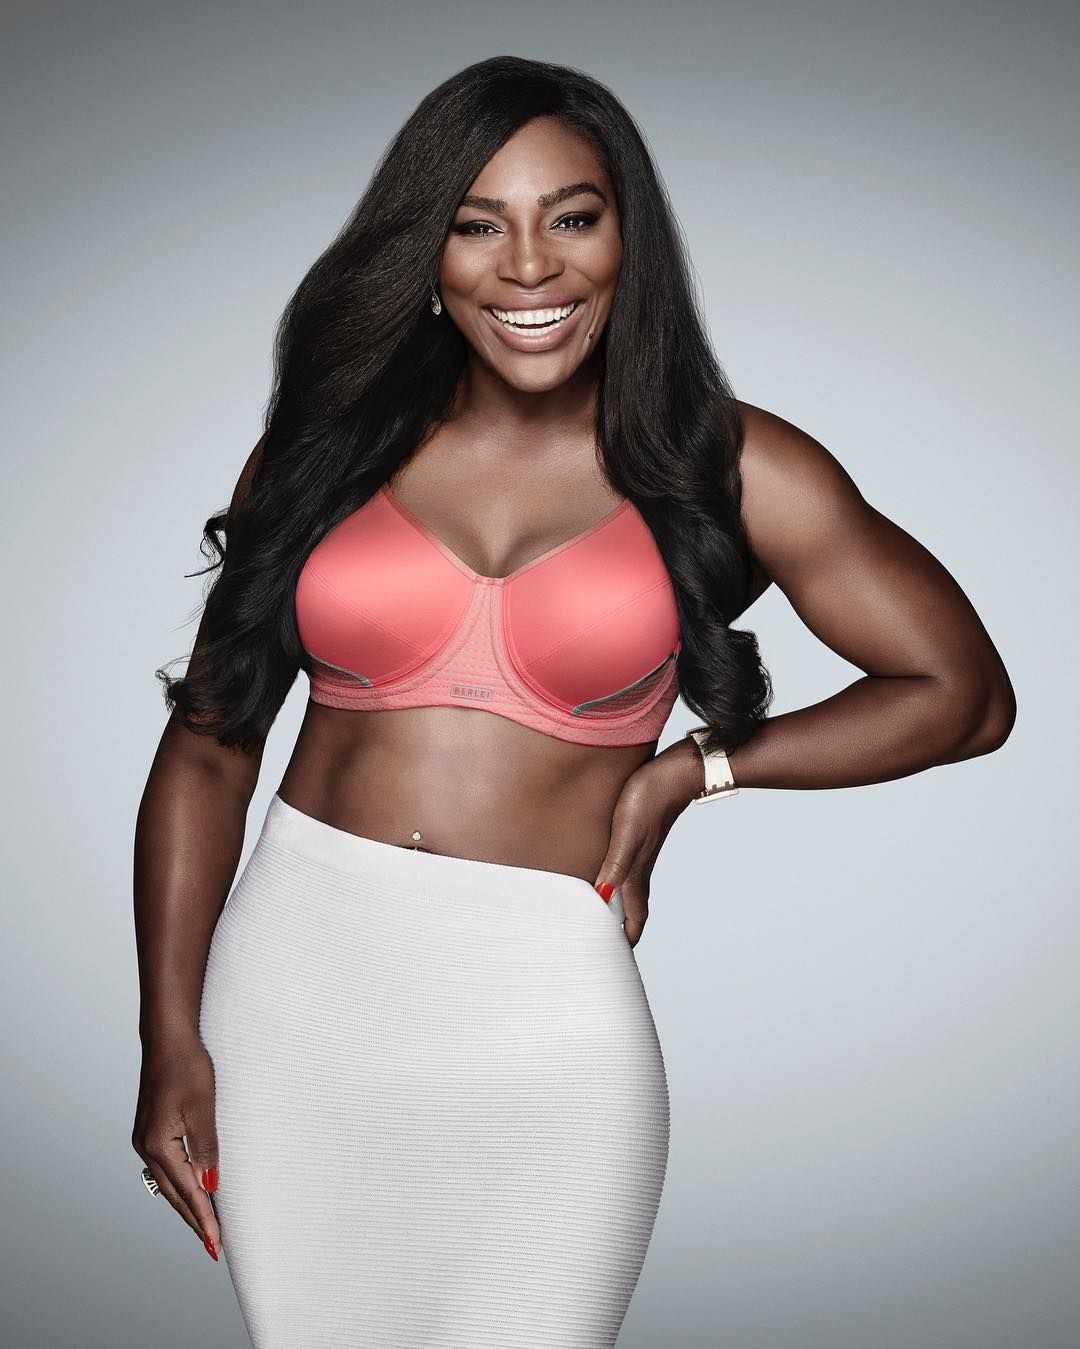 70+ Hot Pictures of Serena Williams Will Drive You Nuts for Her Sexy Body 2